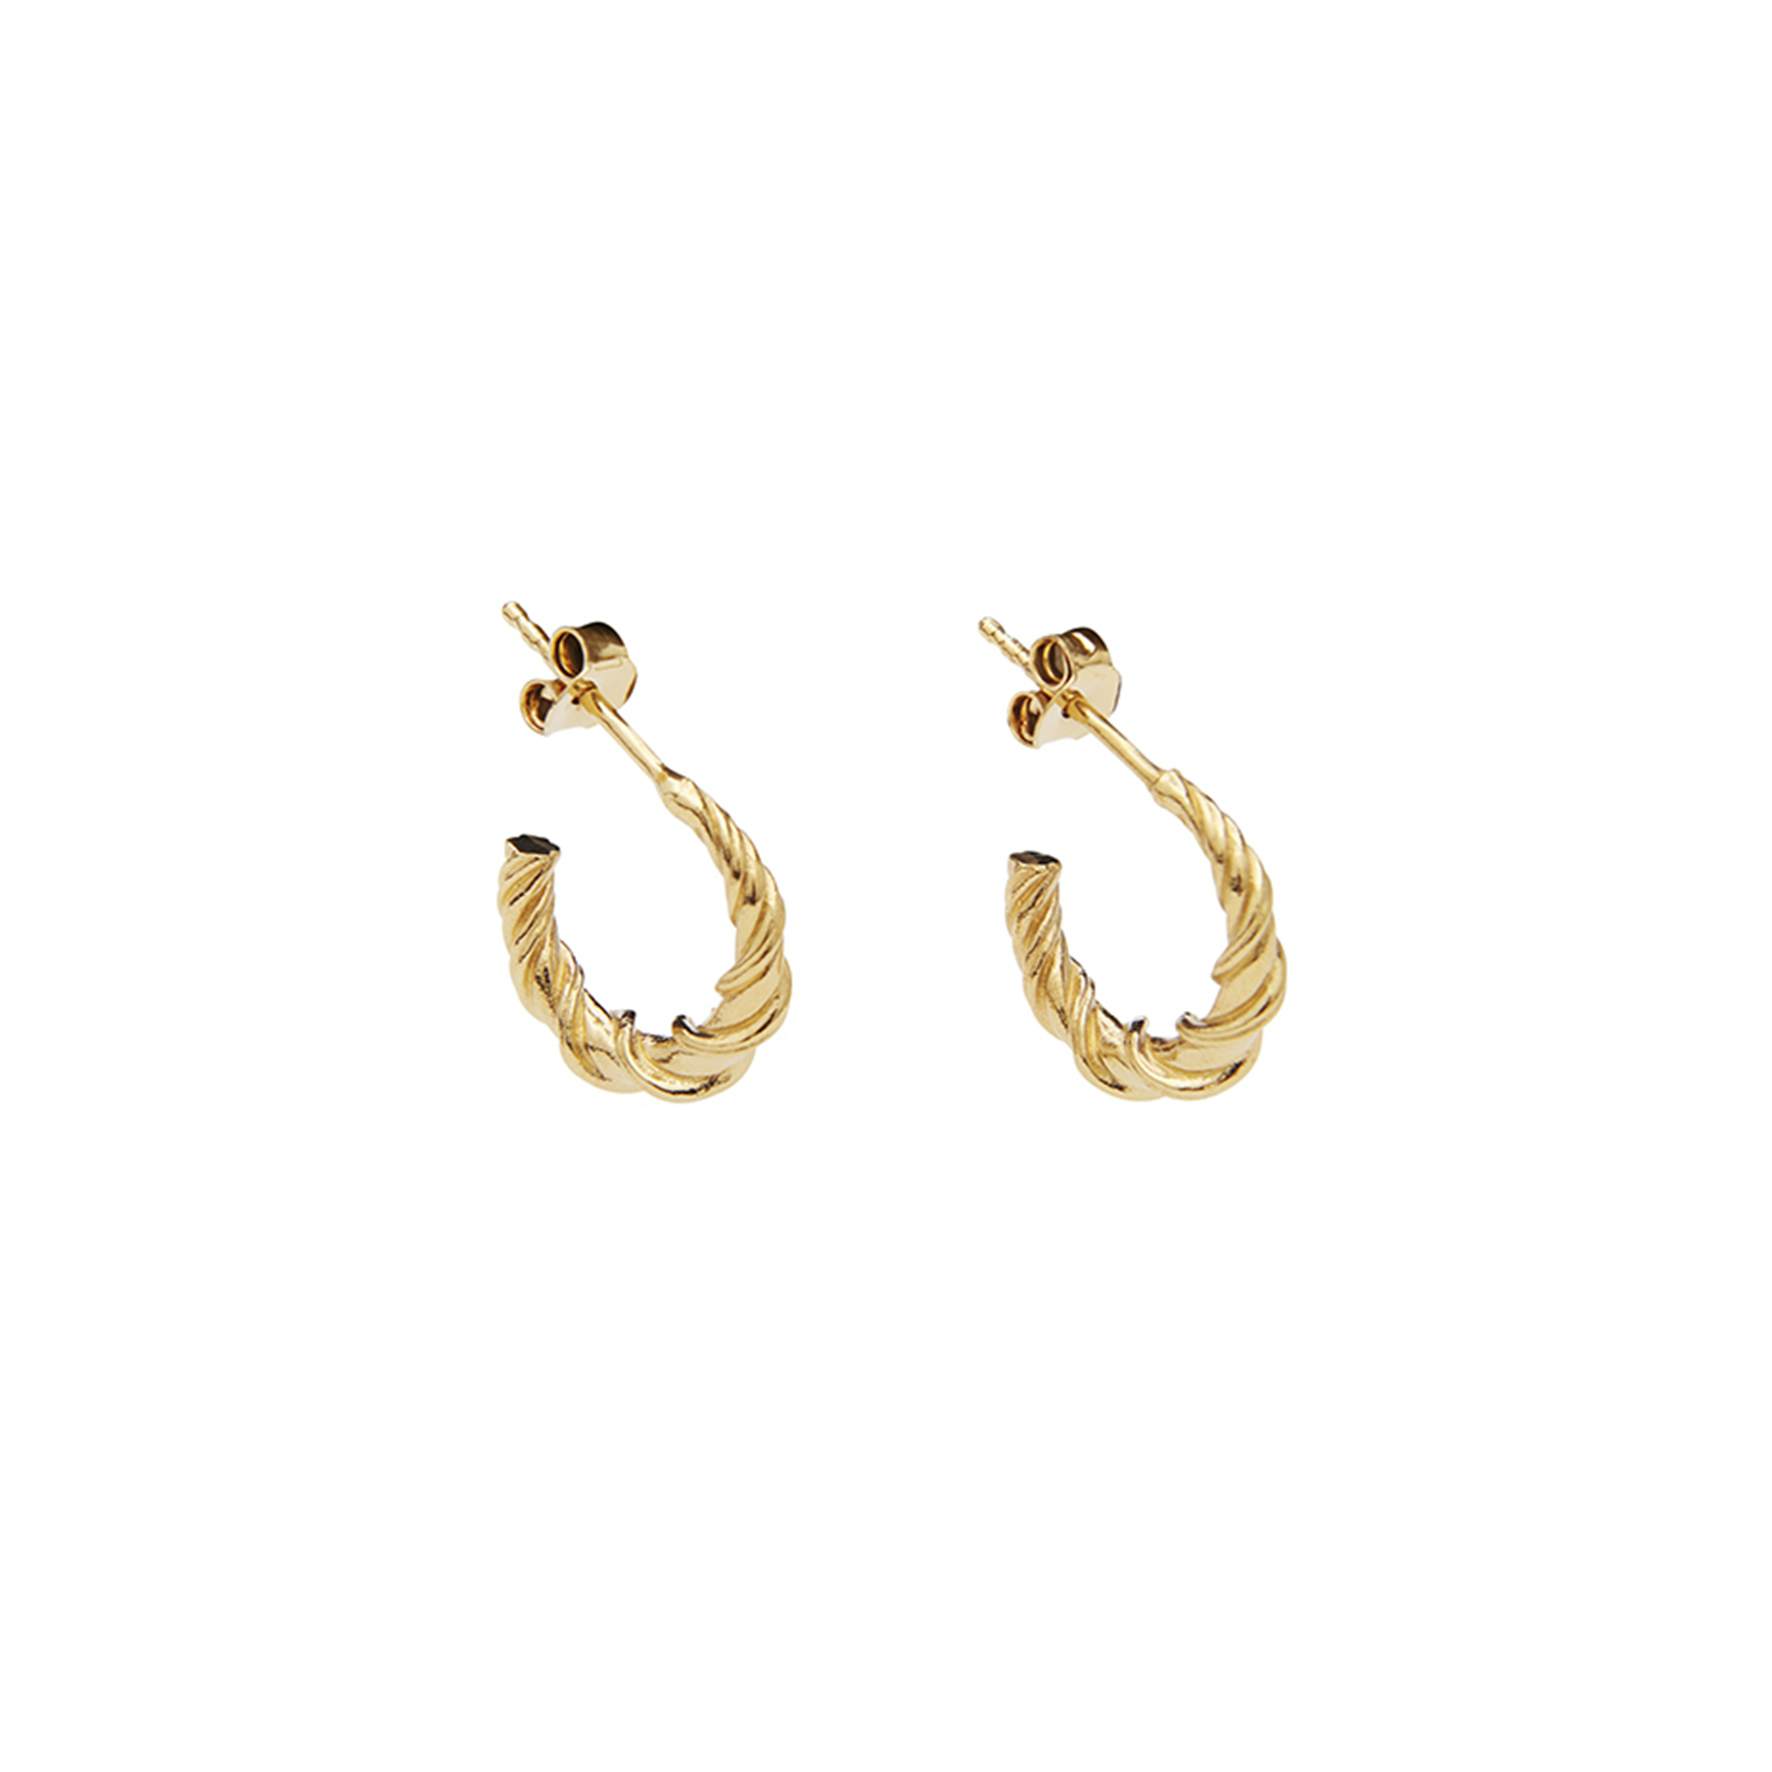 Alinor Studs from Pico in Goldplated-Silver Sterling 925